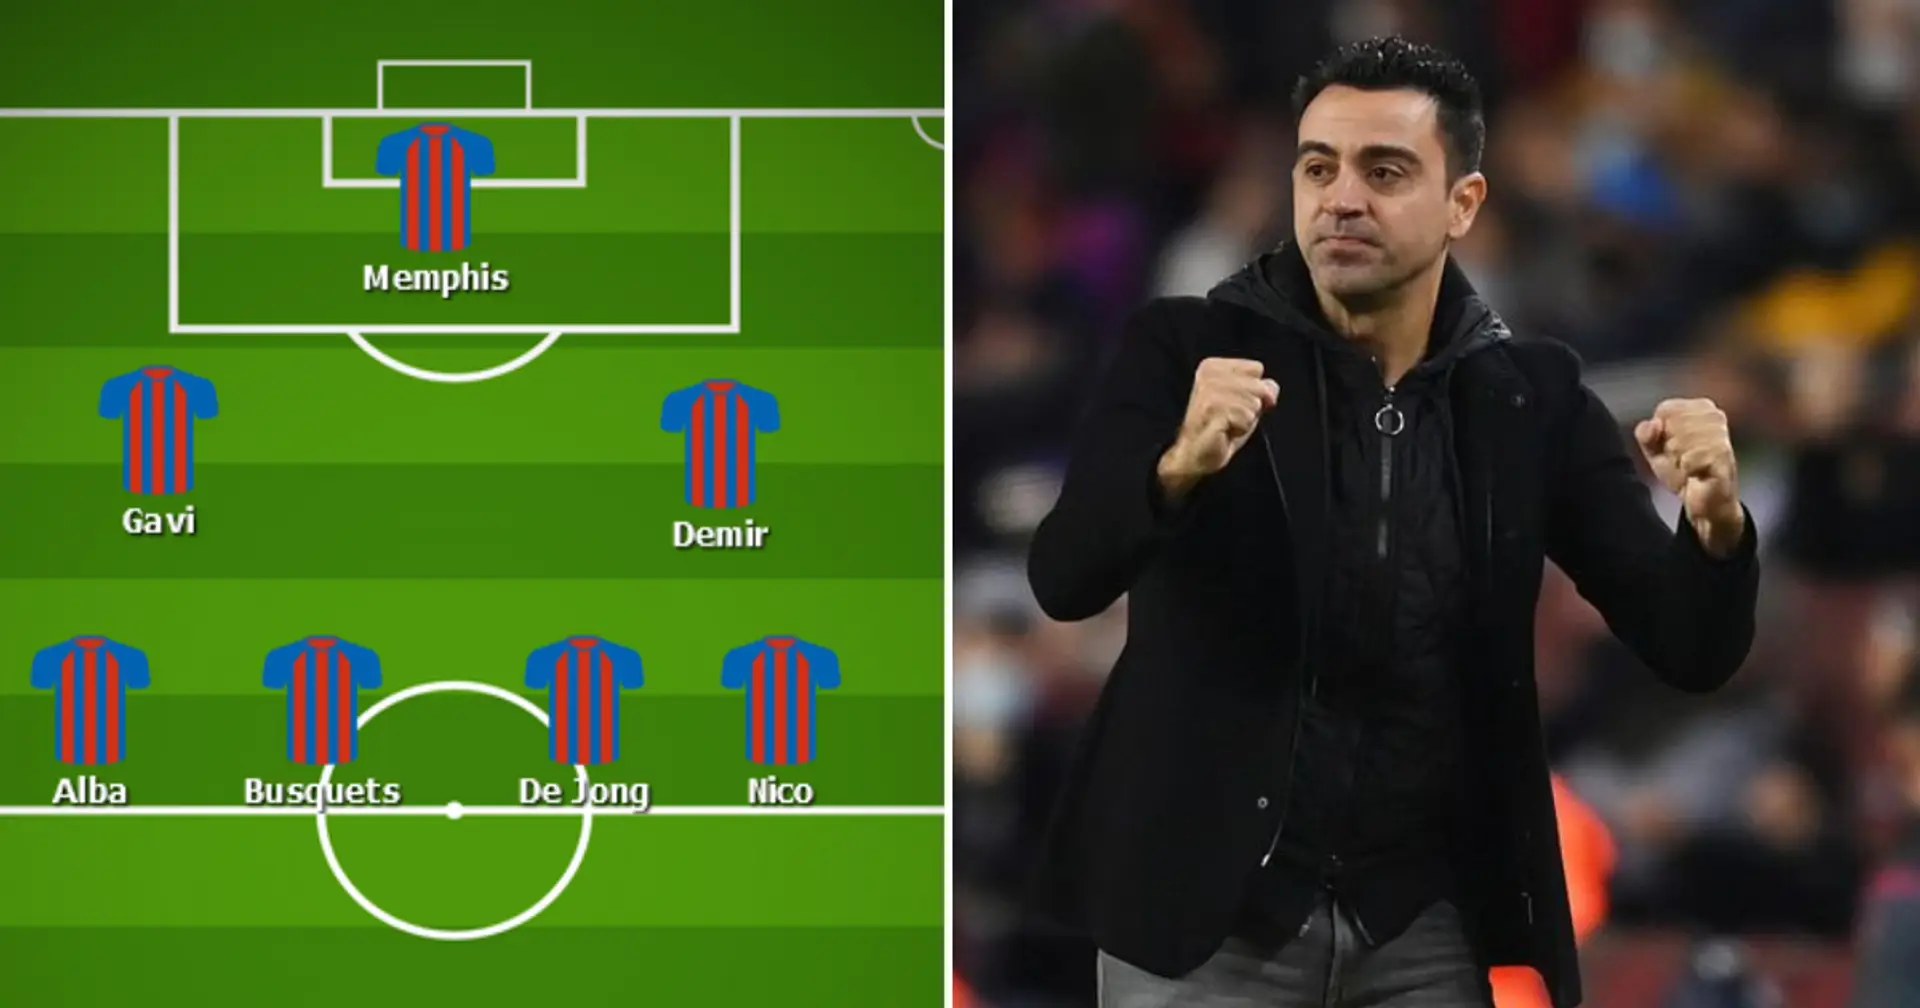 Clear as day: Xavi's formation and style from first 2 games revealed